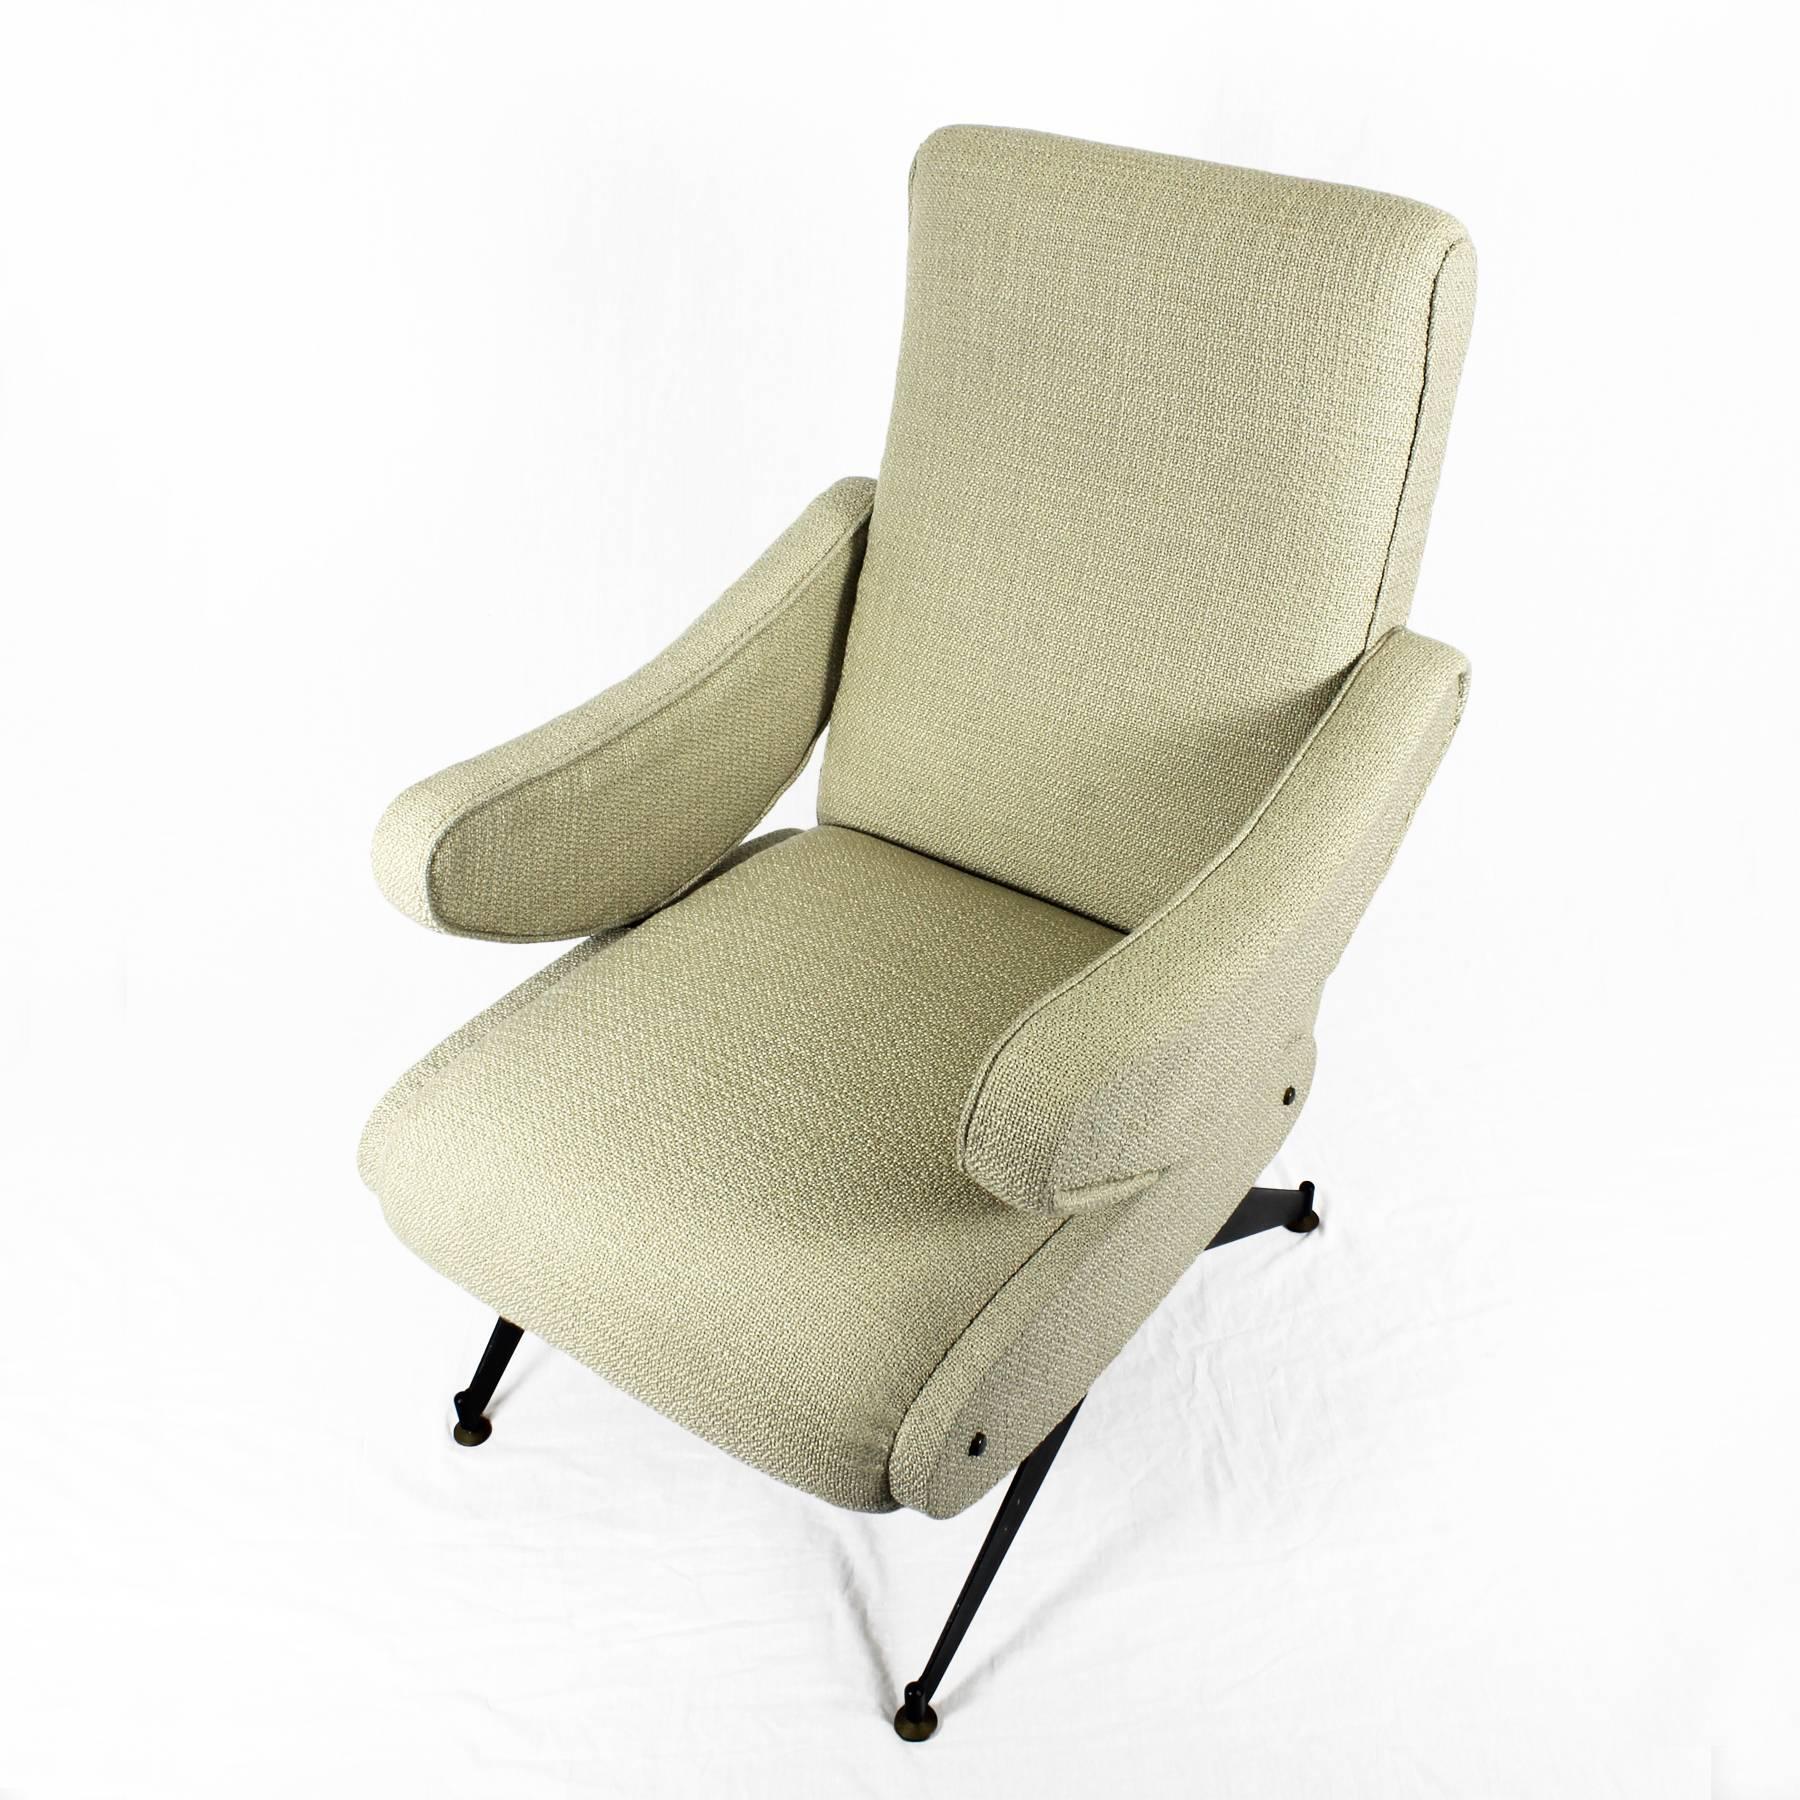 Brass Mid-Century Modern Reclinable Armchair by Oscar Gigante, Beige Fabric - Italy For Sale